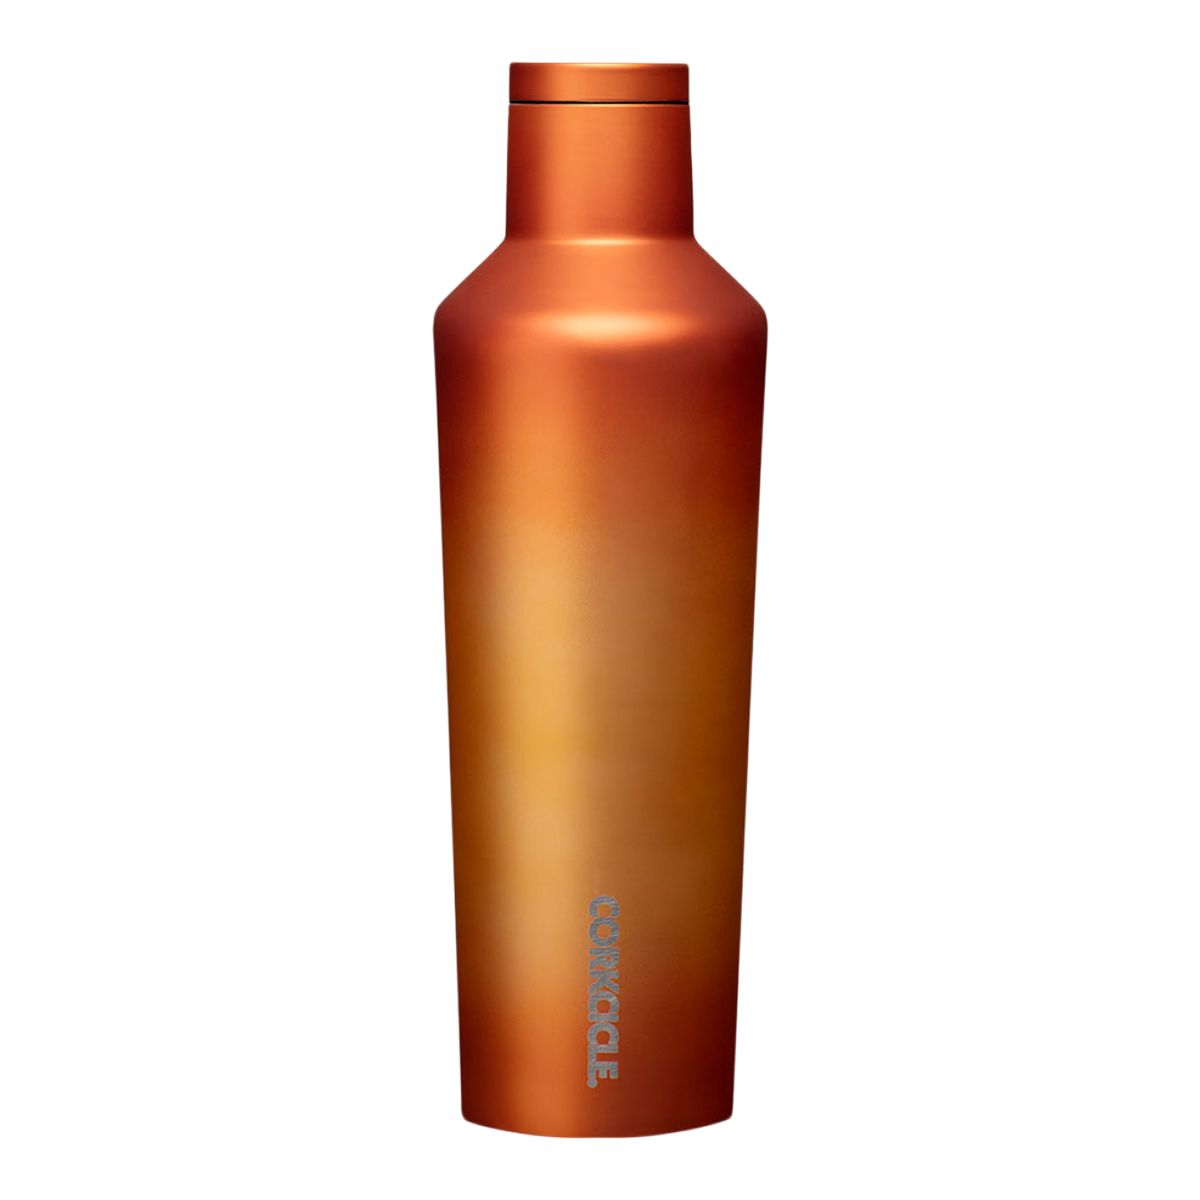 Image of Corkcicle 16 oz Canteen